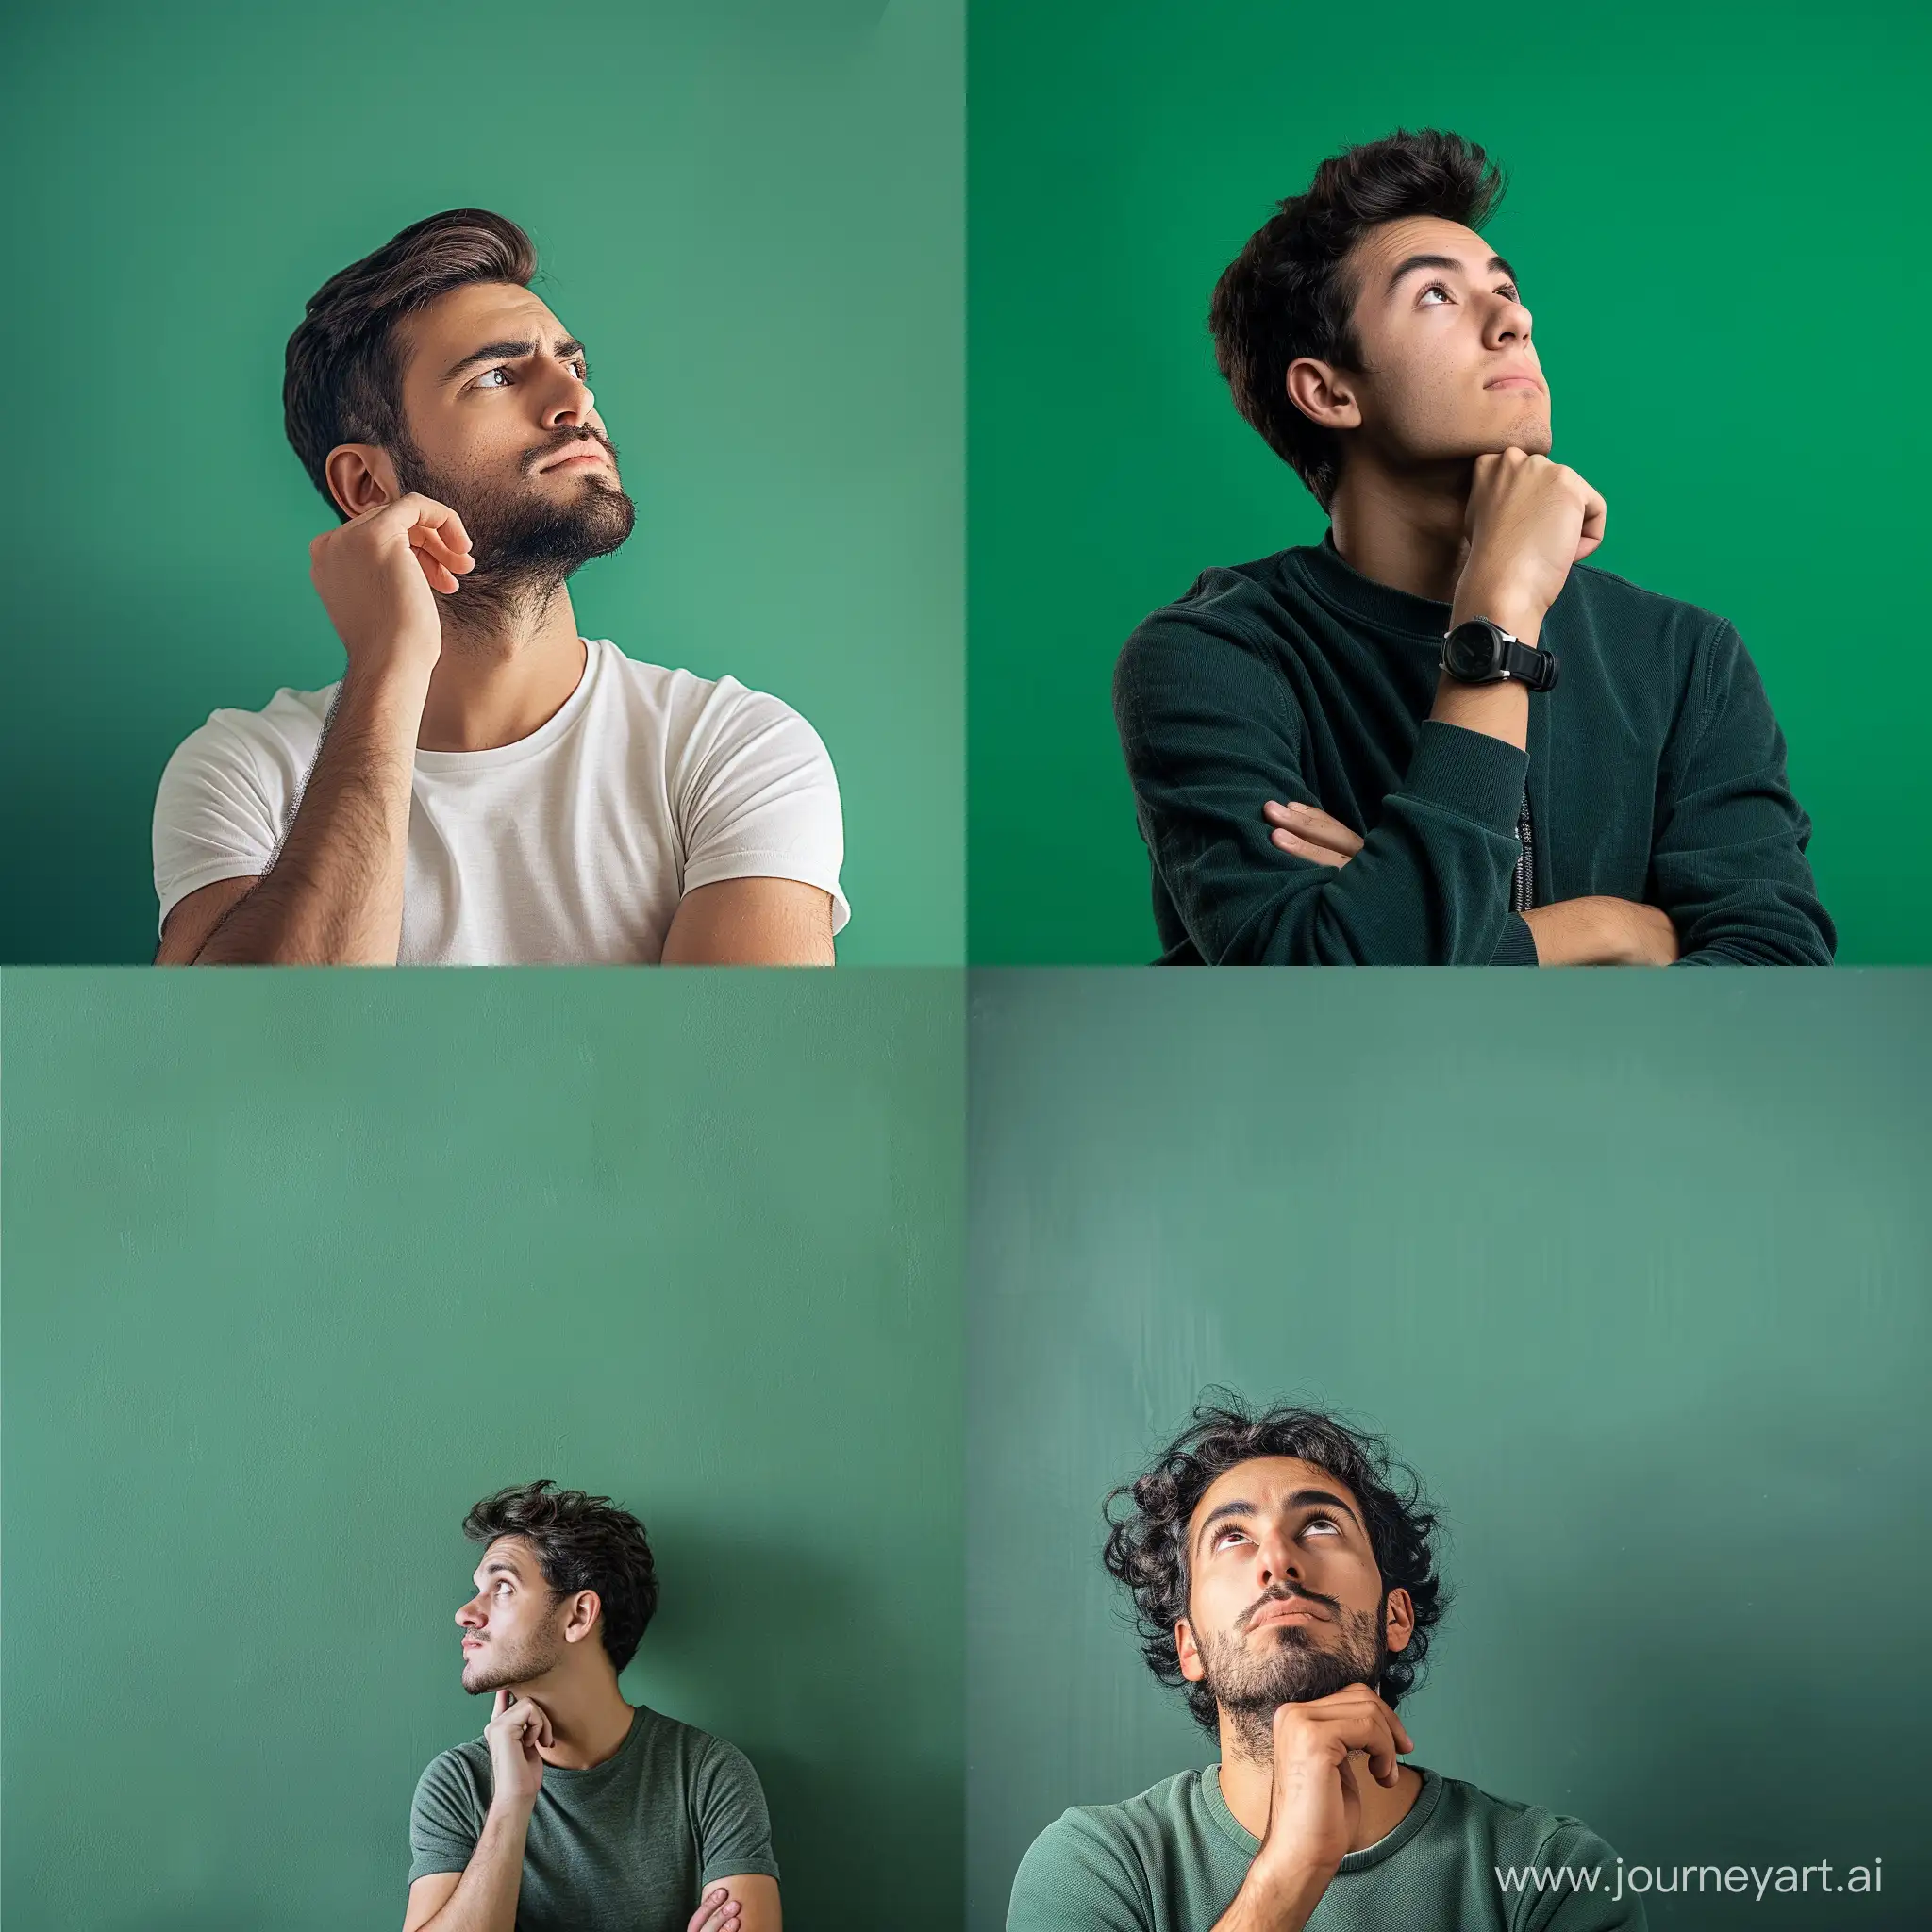 A man thinking and with a green background